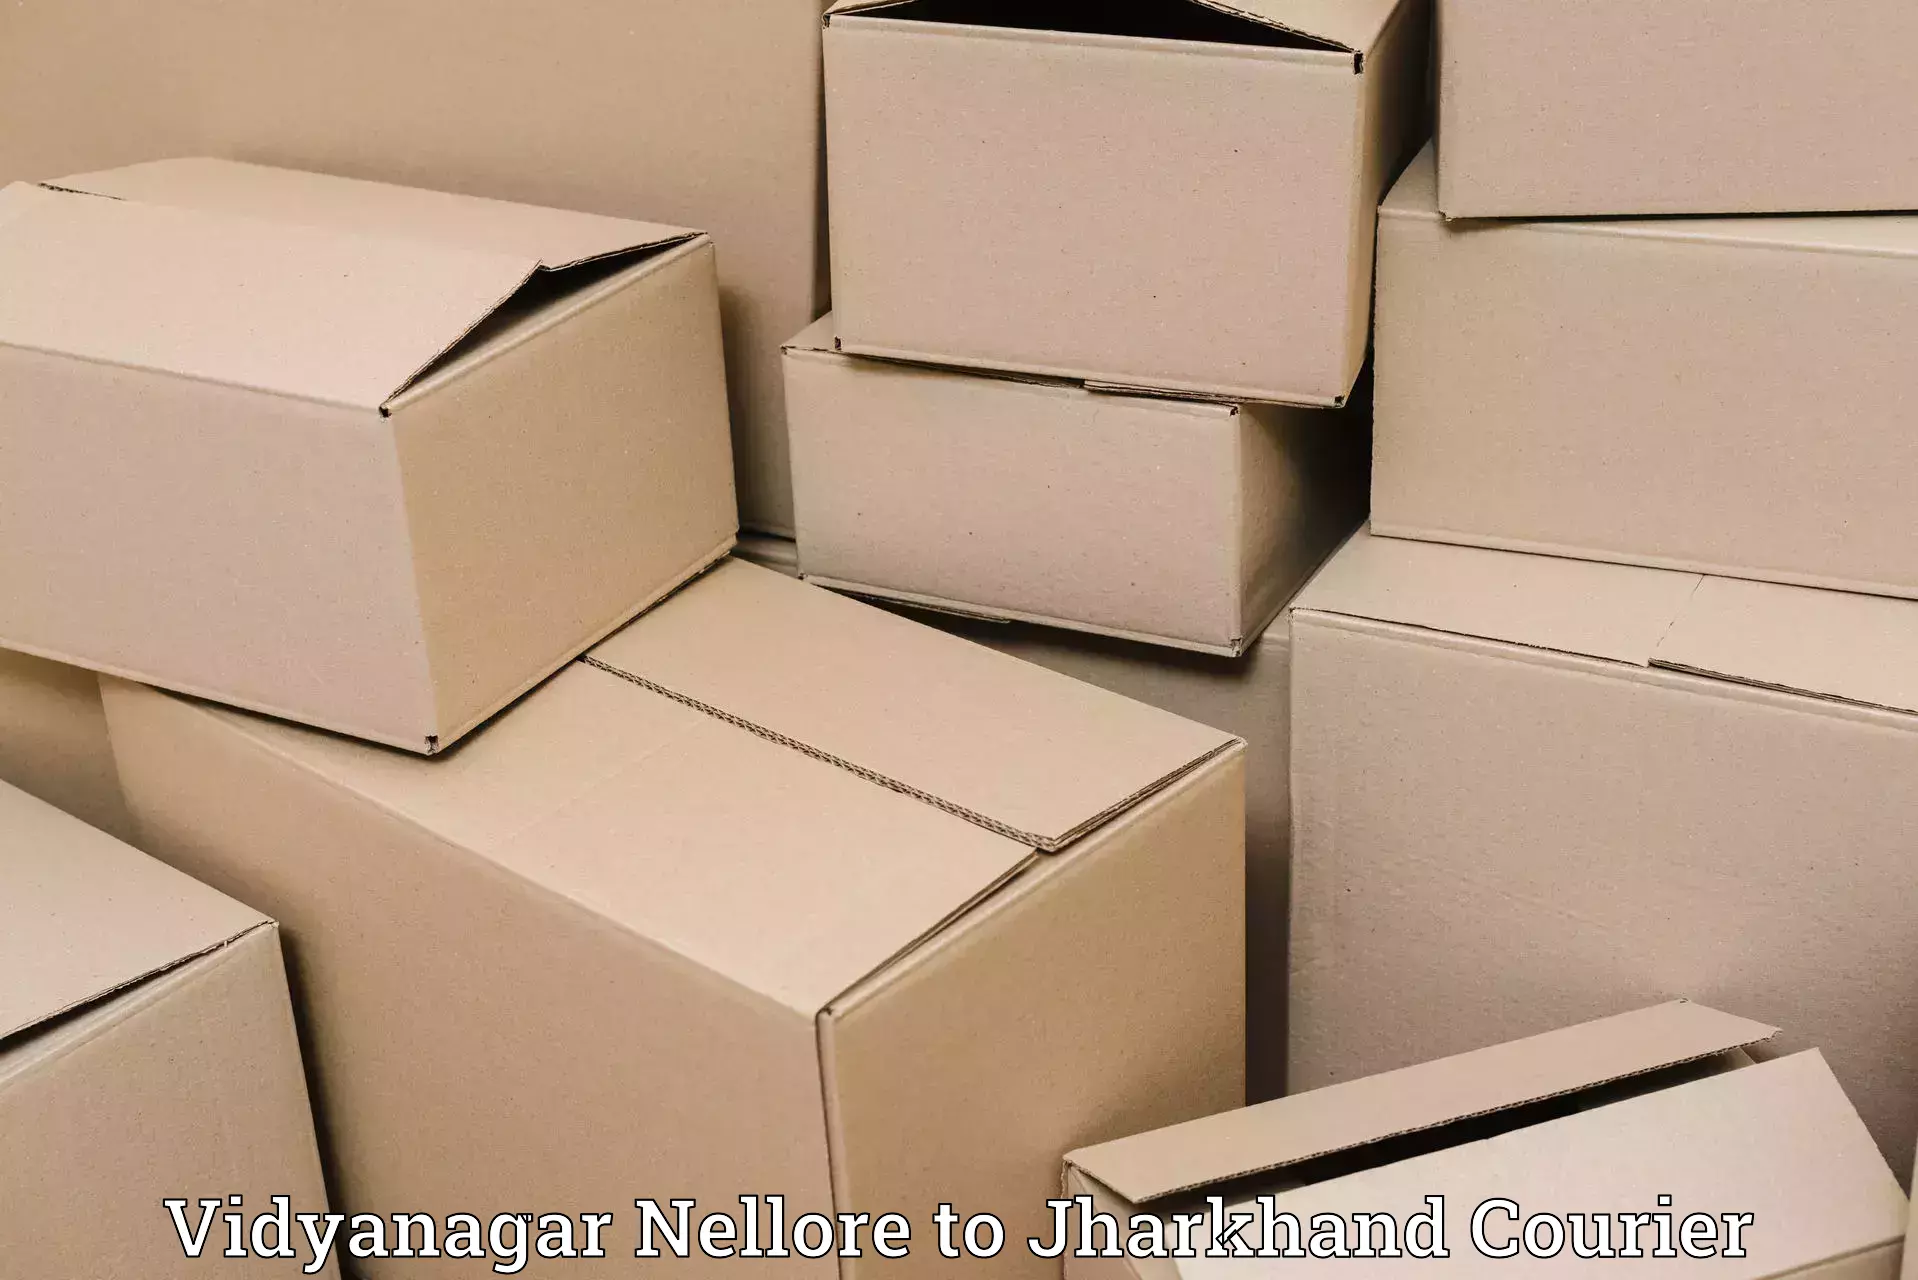 Weekend baggage shipping Vidyanagar Nellore to Jharkhand